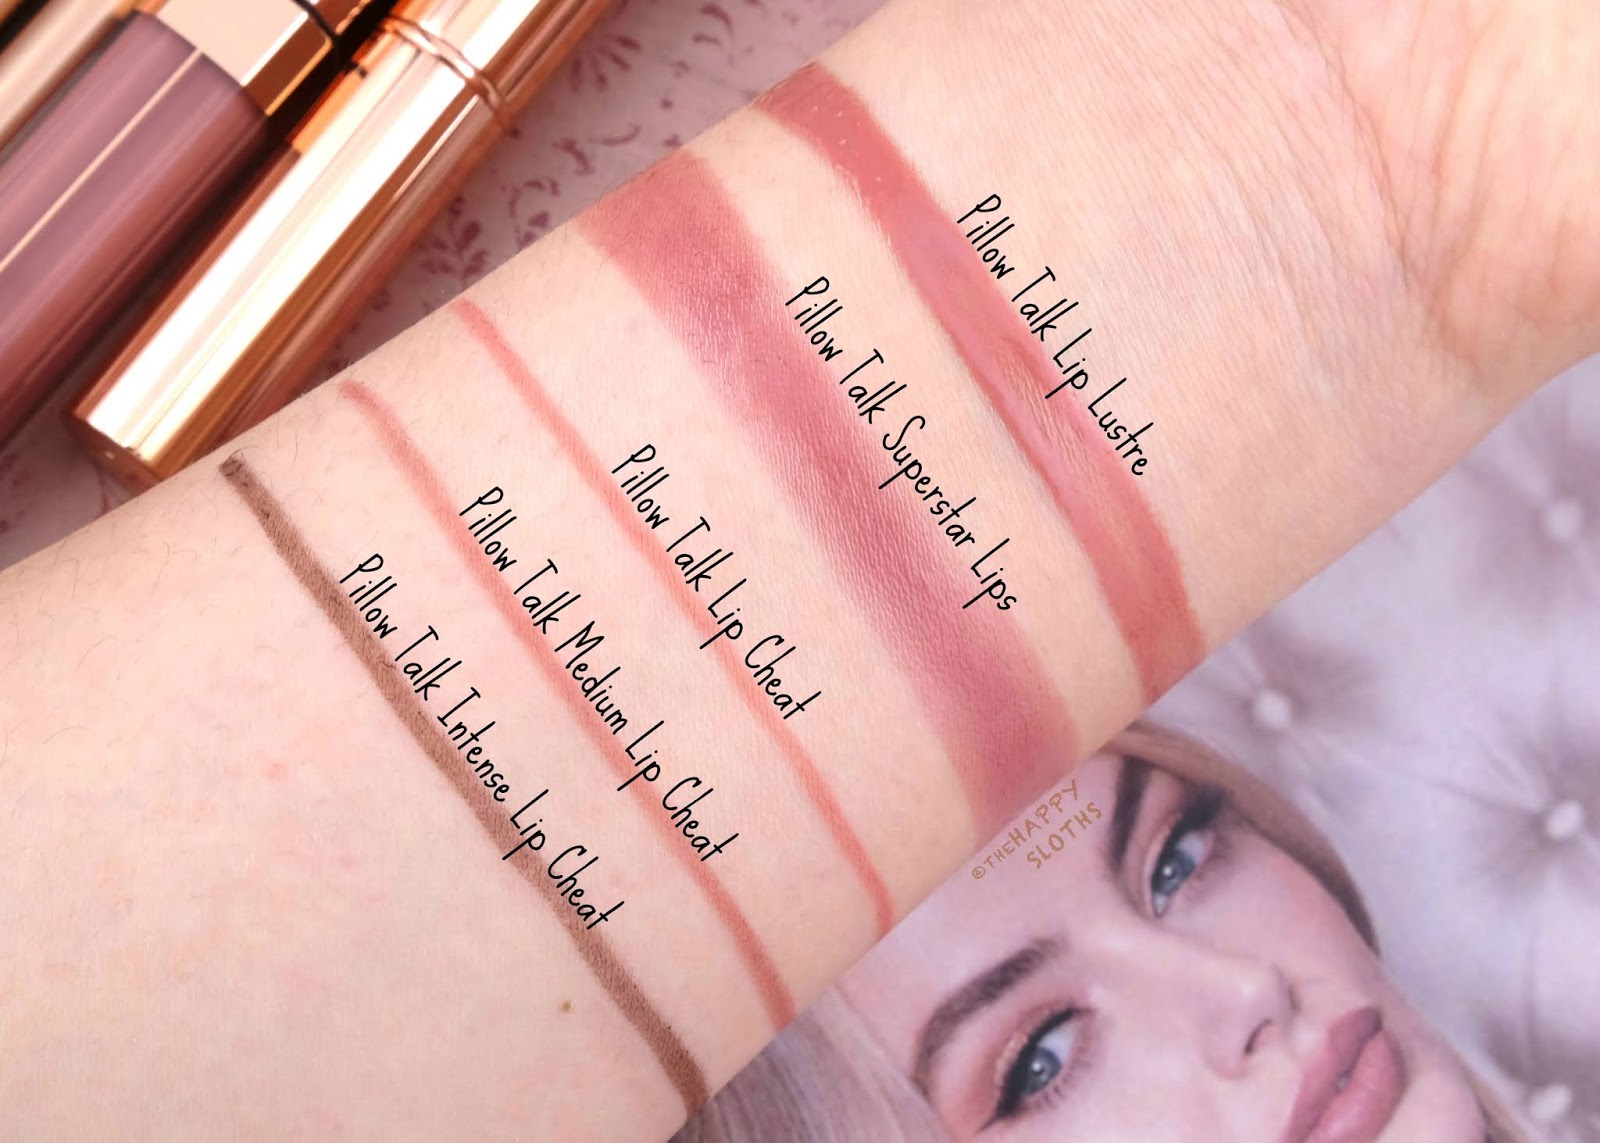 Charlotte Tilbury | Lip Cheat Lip Liner in "Pillow Talk", "Pillow Talk Medium" & "Pillow Talk Intense": Review and Swatches